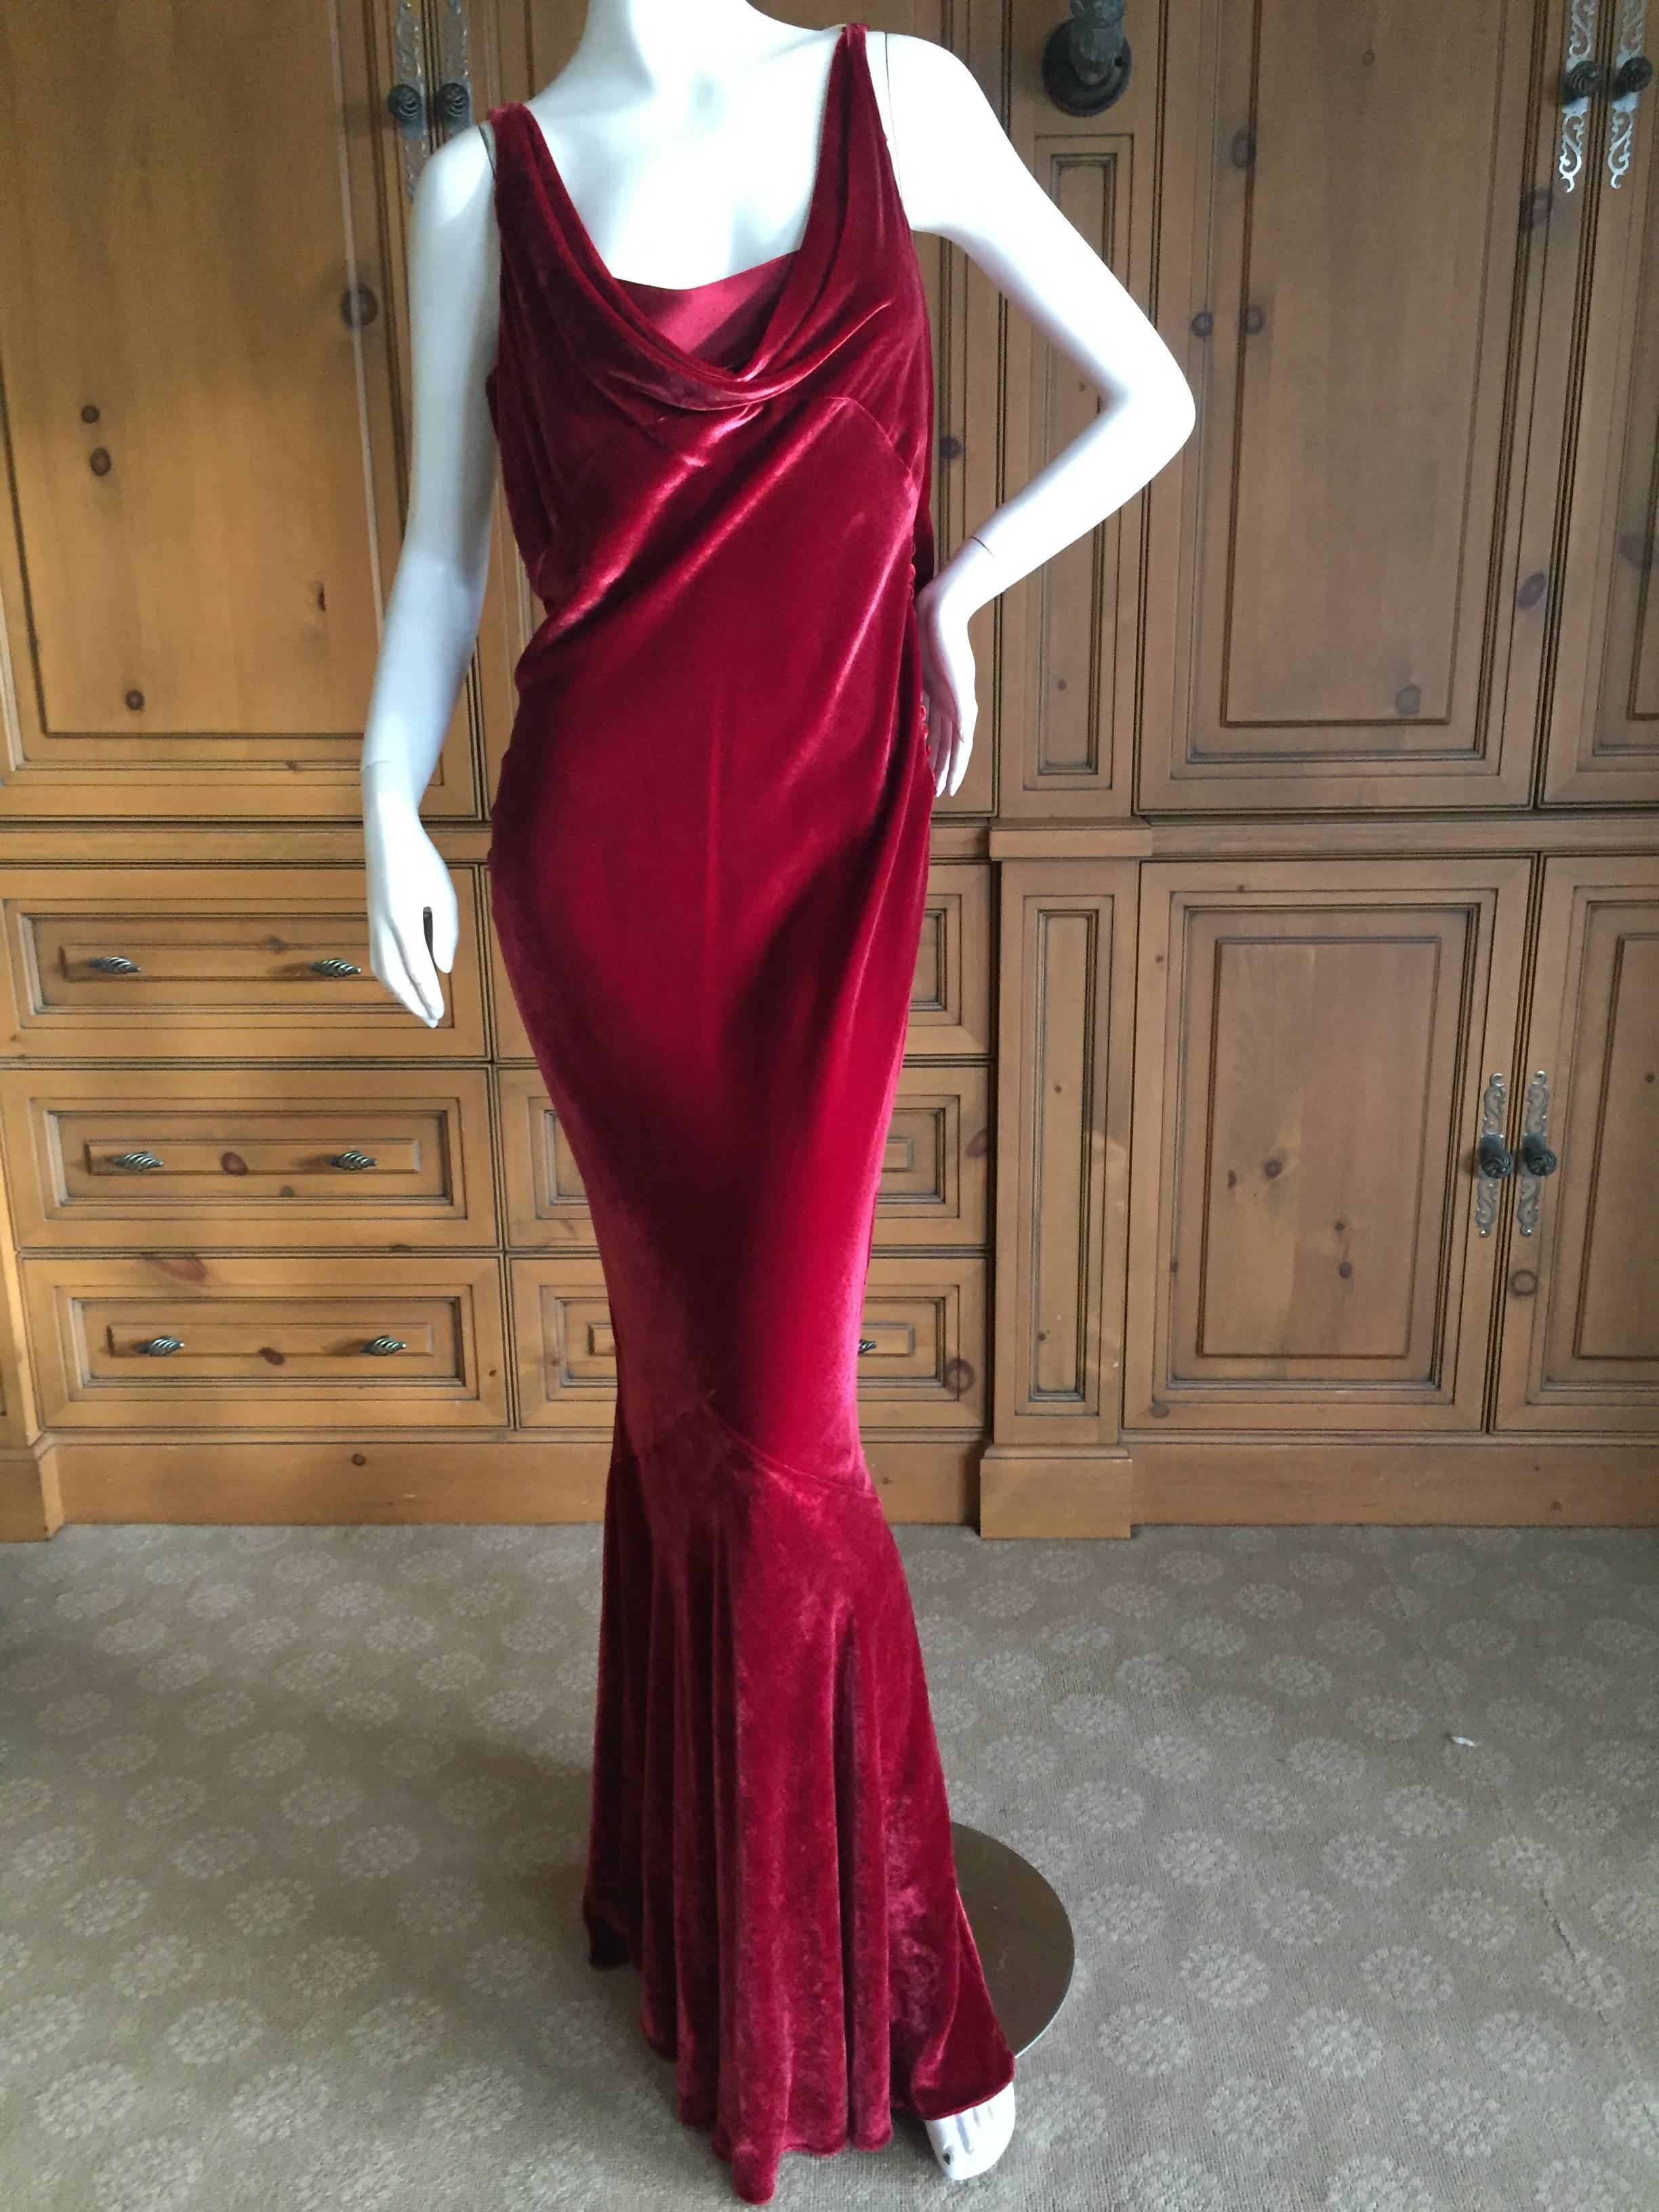 Superb bias cut burgundy velvet gown from John Galliano.
Featuring a low cut sheer back with embroidered carnation tattoo pattern, so chic.
This is one of my all time favorite Galliano dresses, it is so romantic.
Size 44 Fr US 10
Bust 41